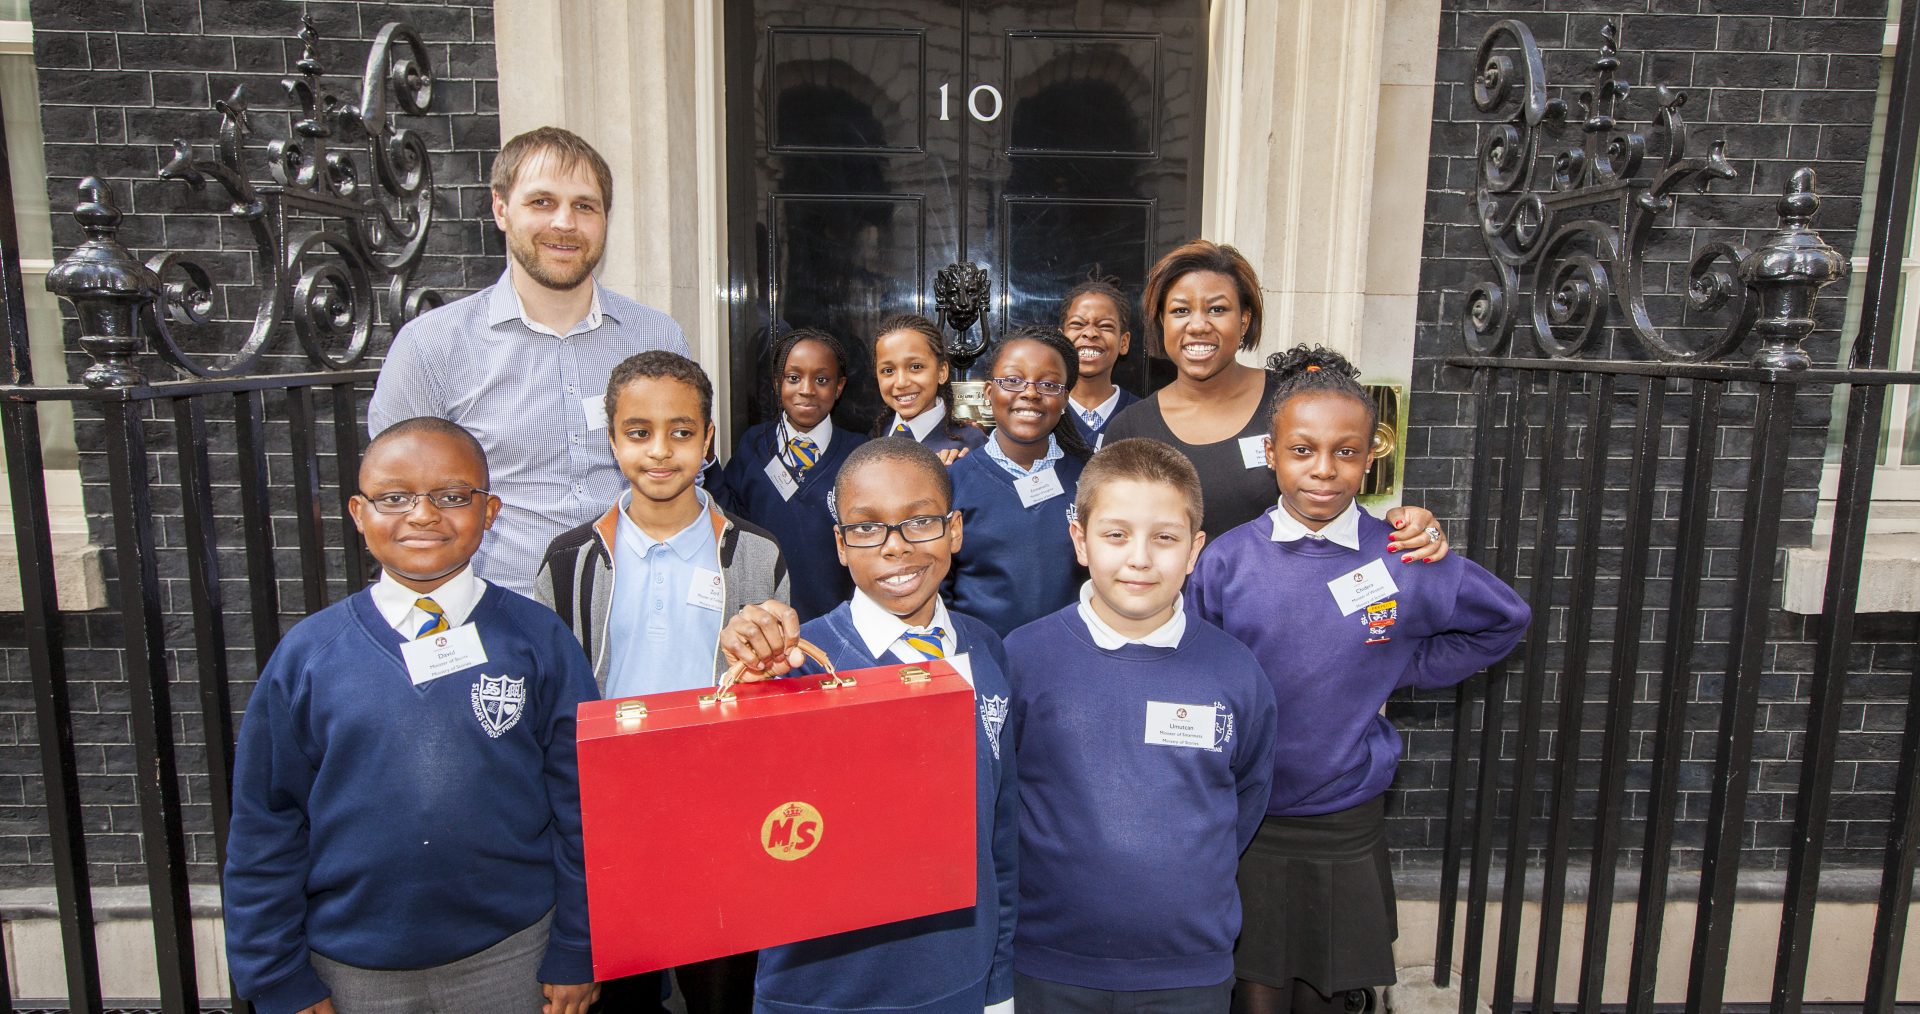 Ministry of Stories goes to No. 10 (photo: Tom Oldham)